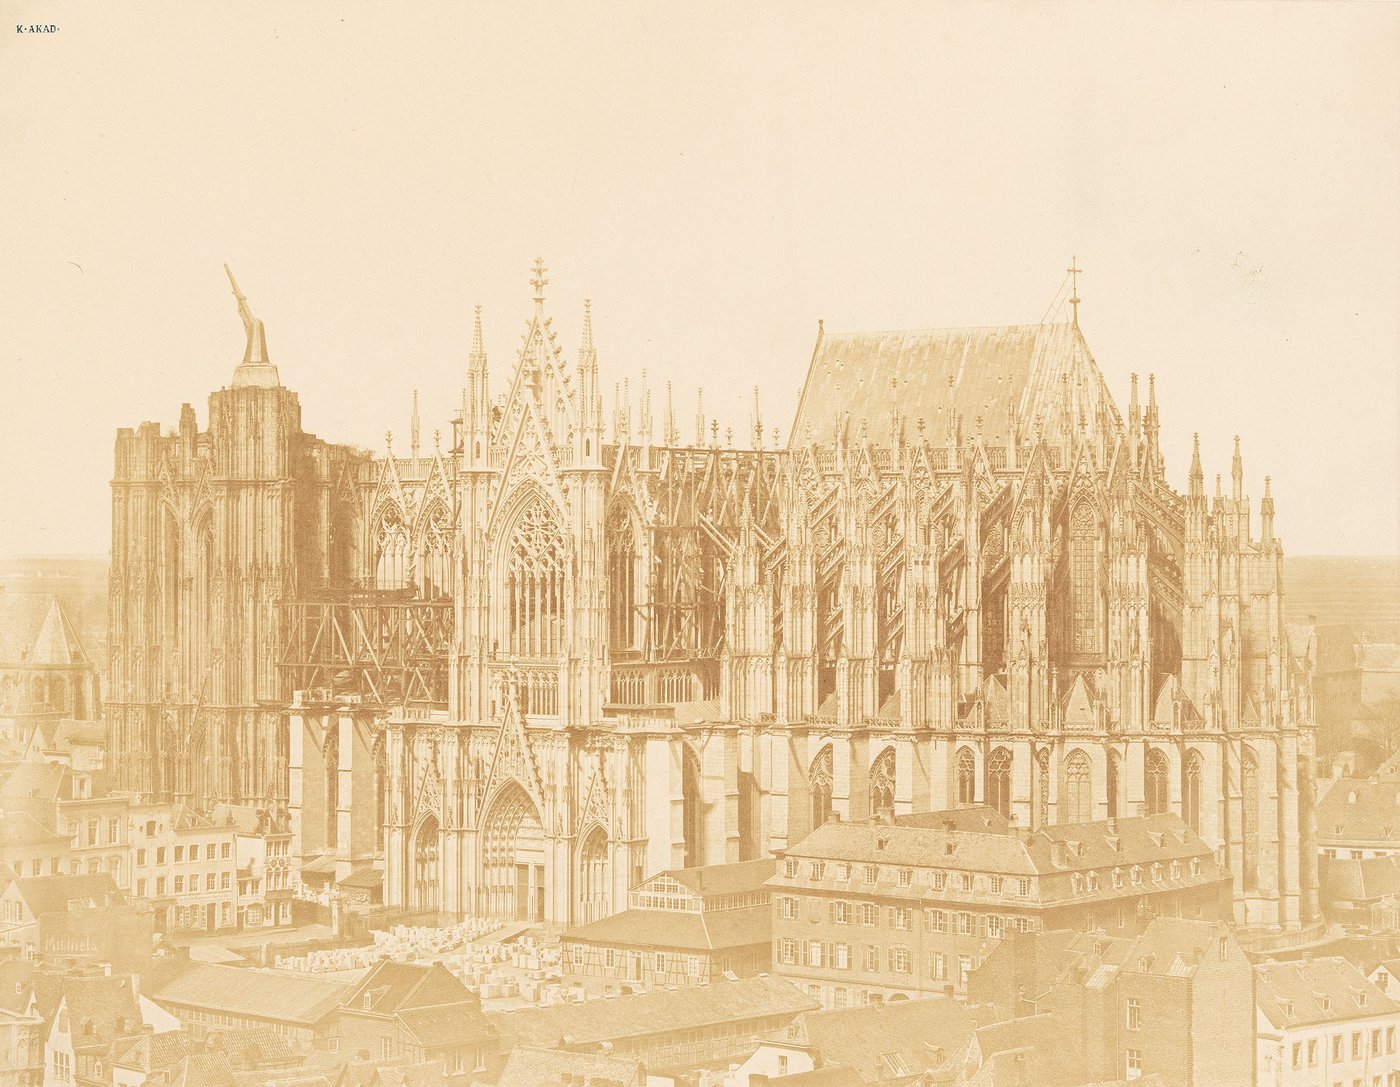 Photograph of the Cologne Cathedral under construction, still without the towers of the west façade.